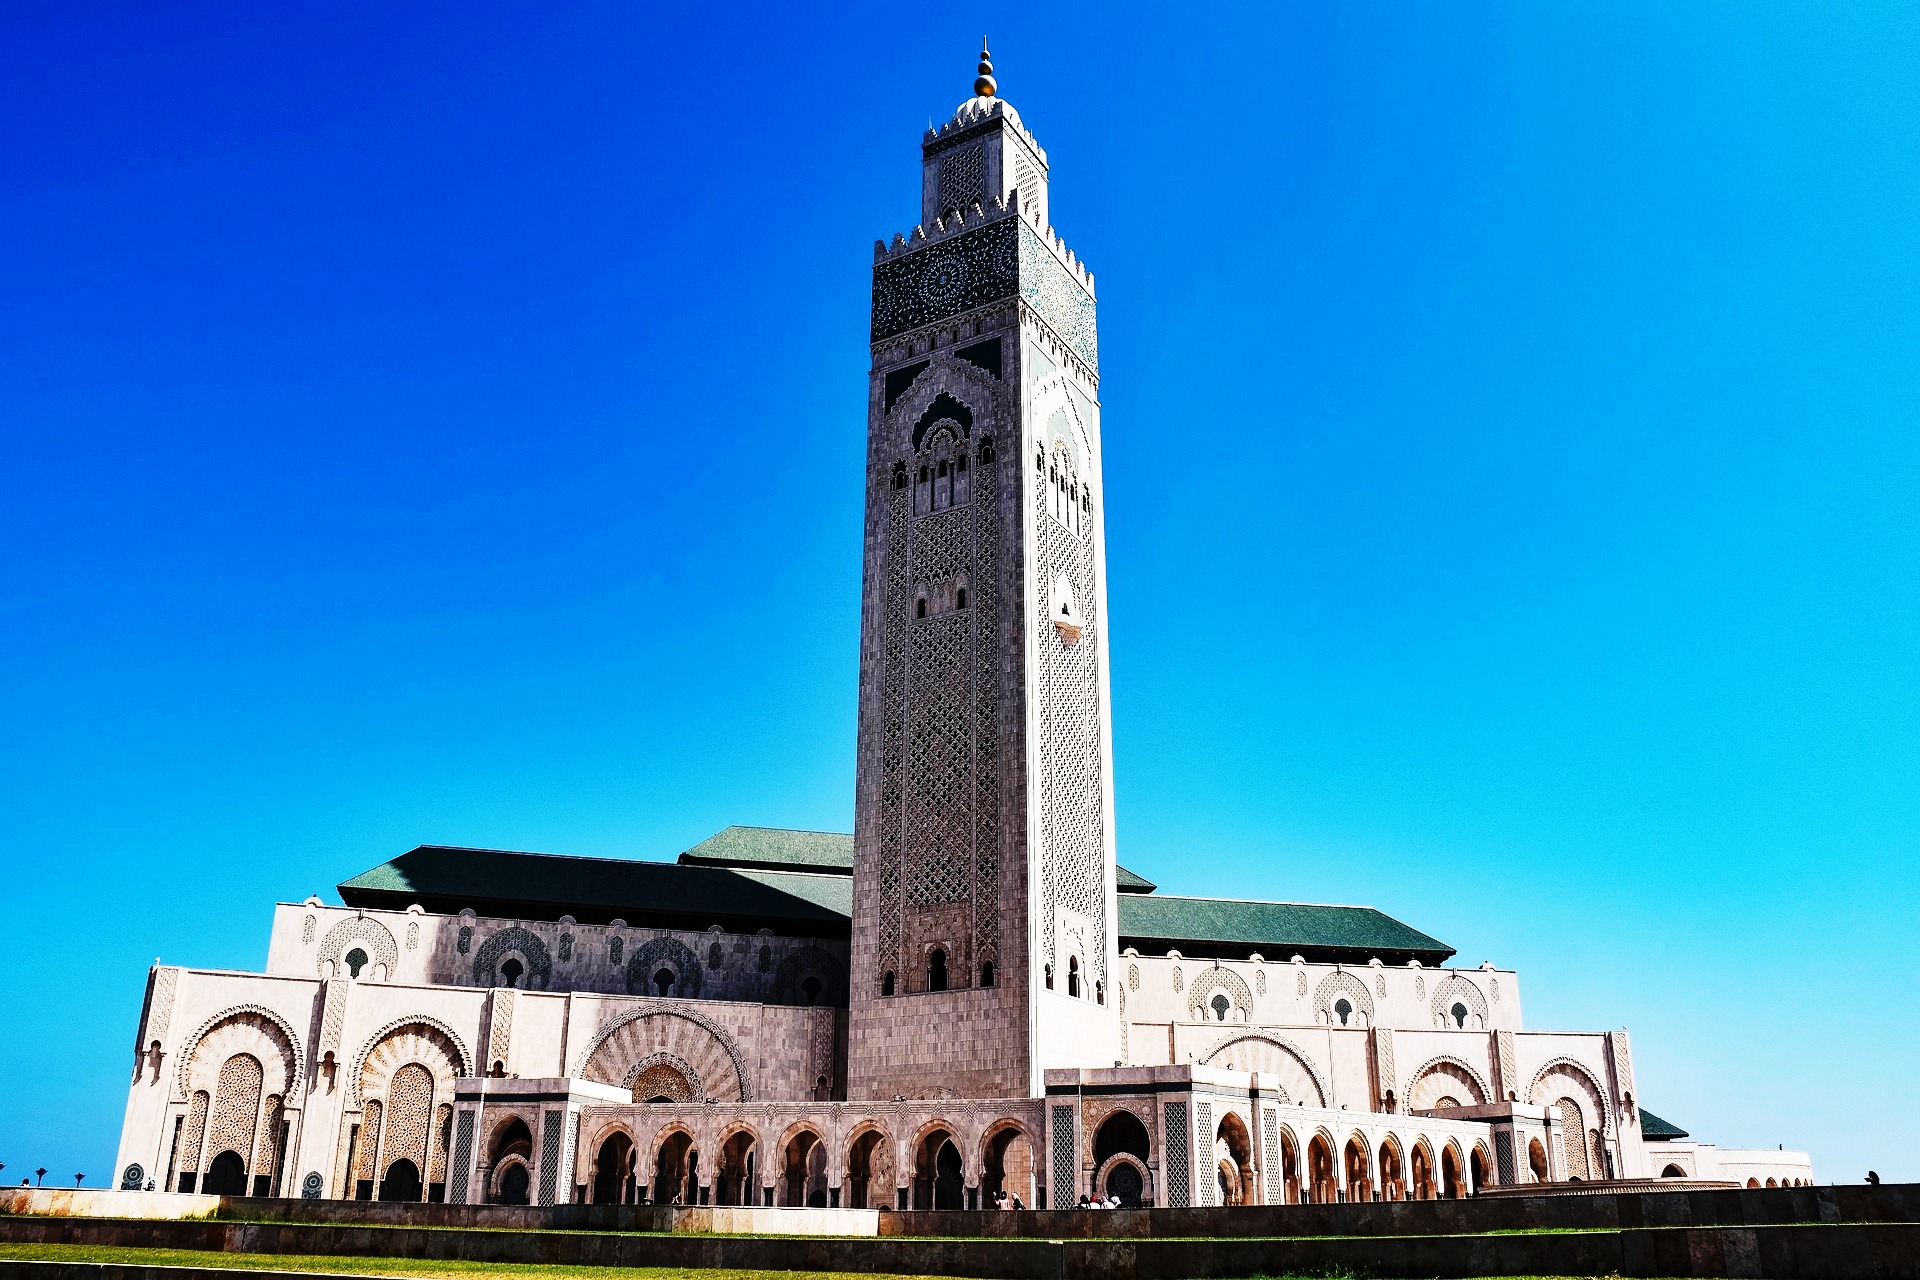 15 days majestic Morocco tour from Casablanca to explore the highlights of Morocco